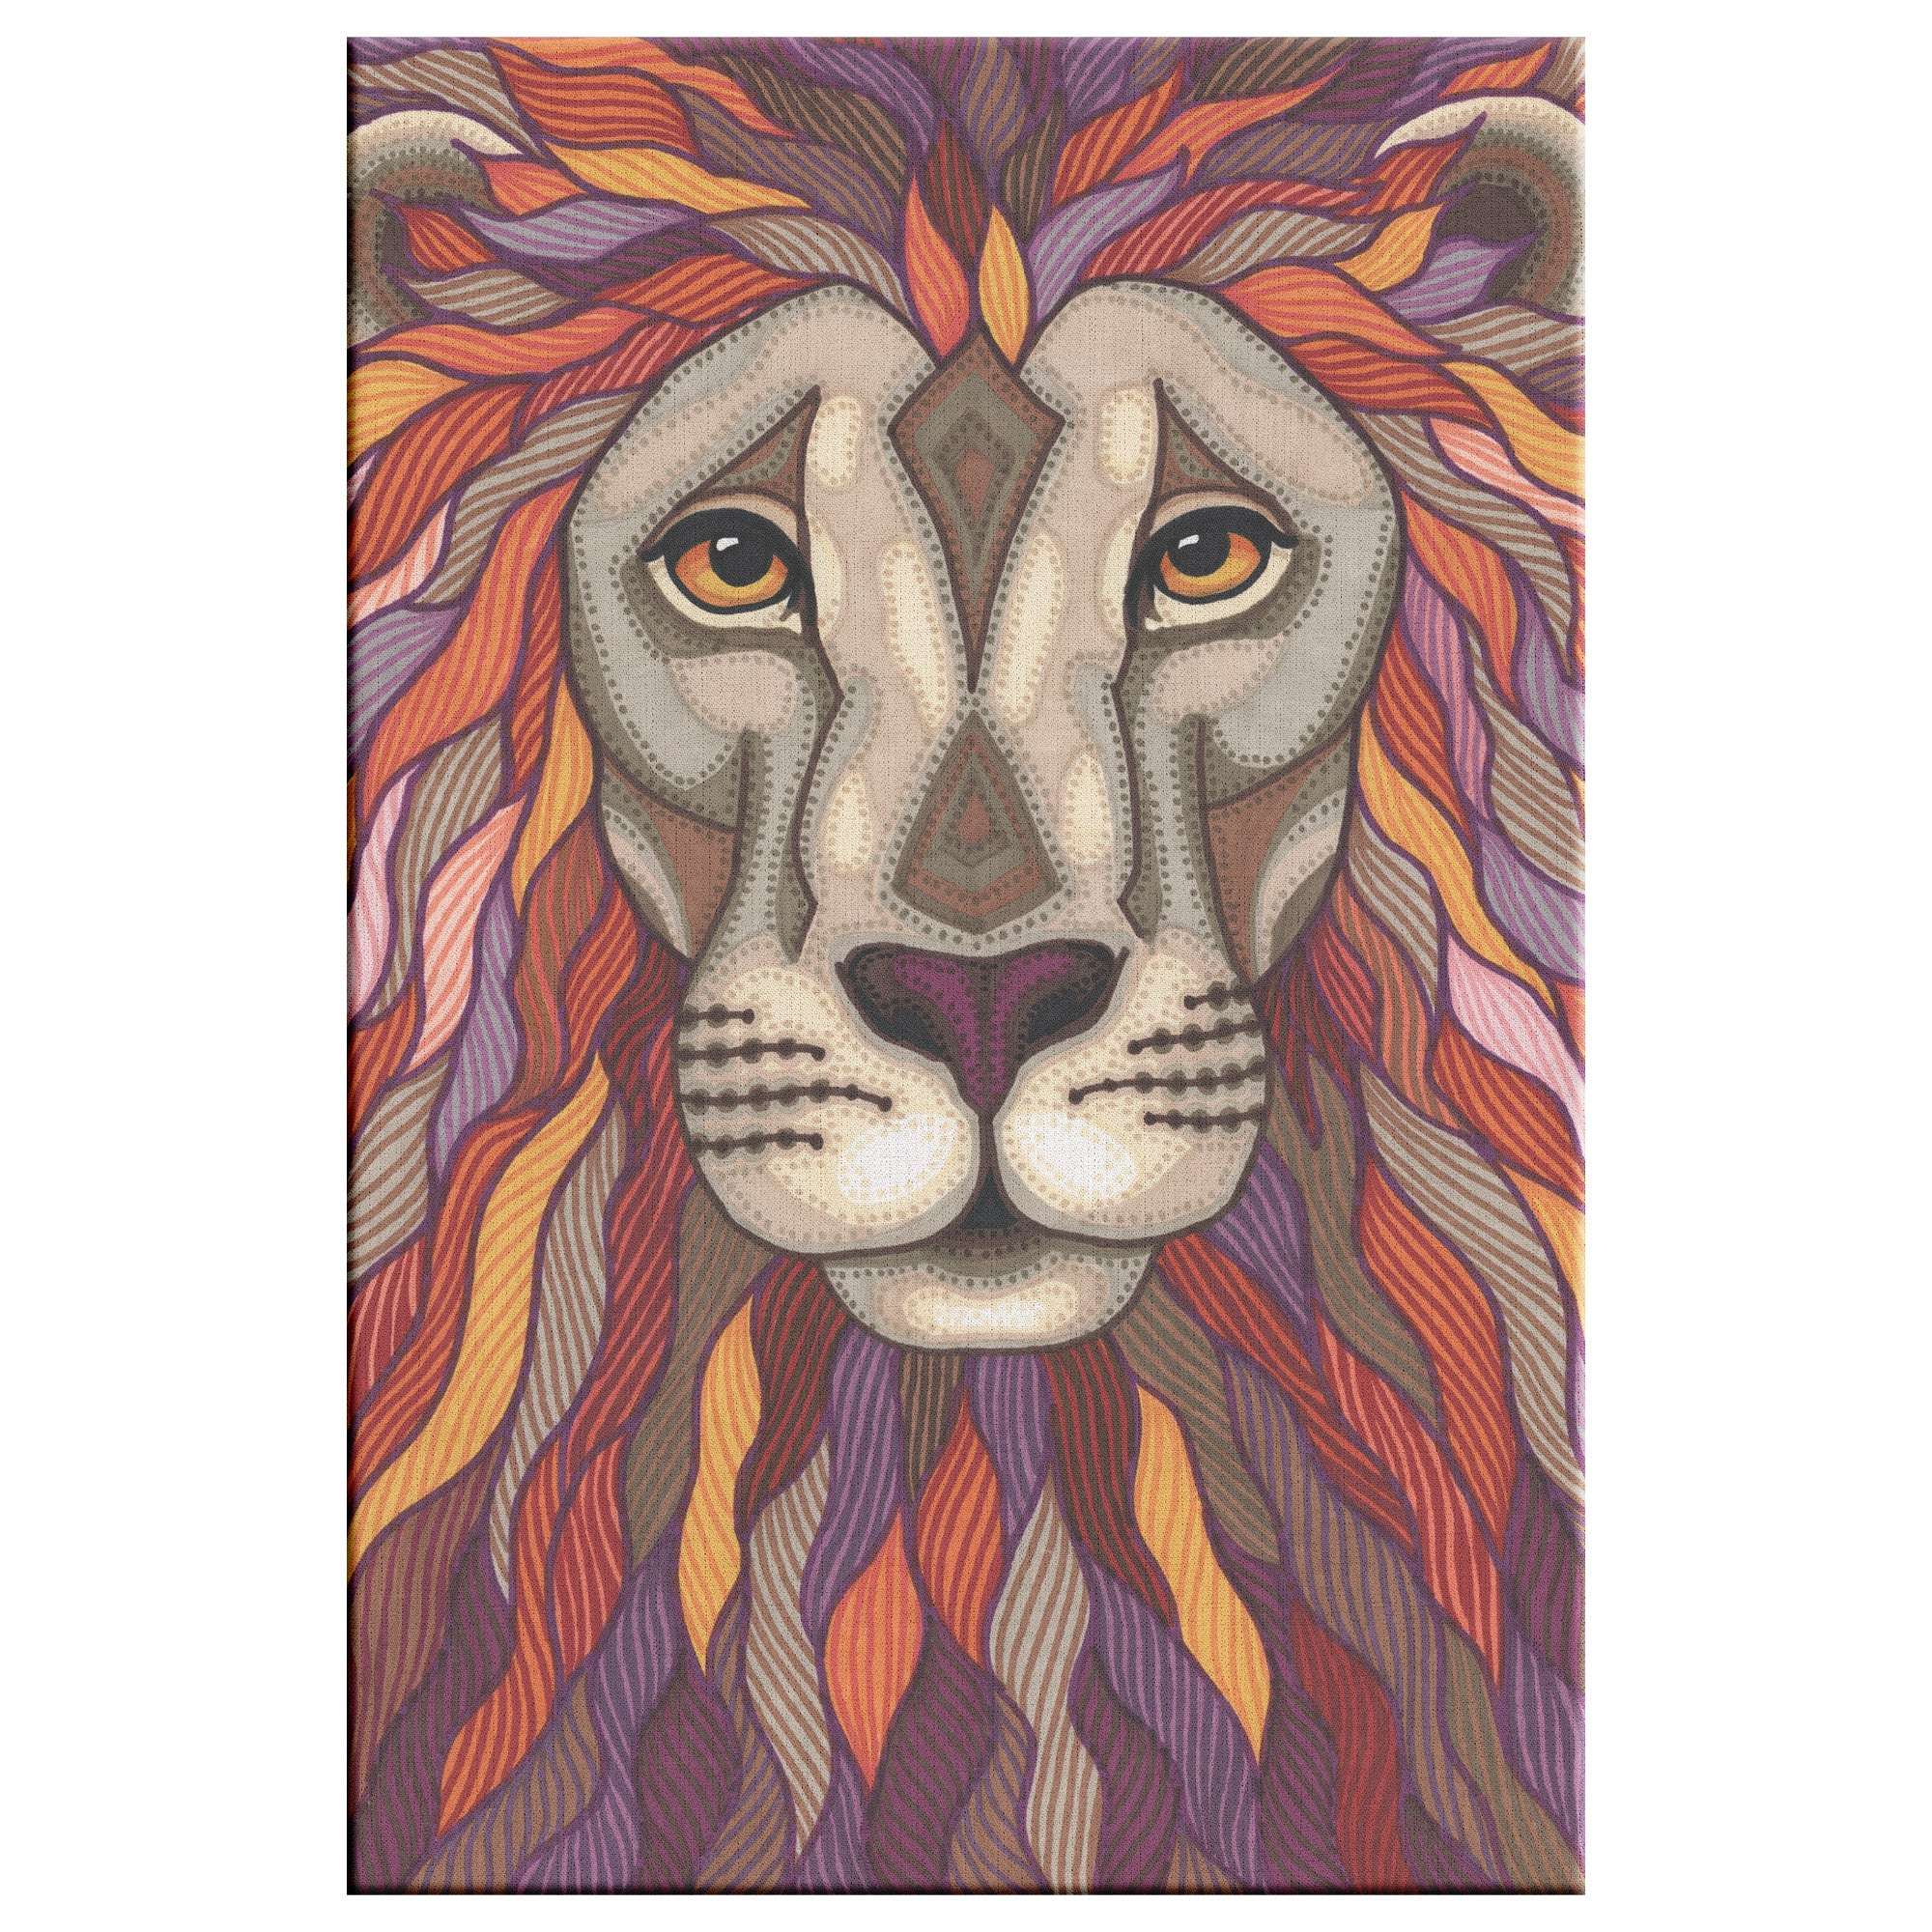 Illustration of a lion's face with a detailed, colorful mane in shades of purple, orange, and yellow, styled in intricate patterns on the Lion Pride Canvas Print.